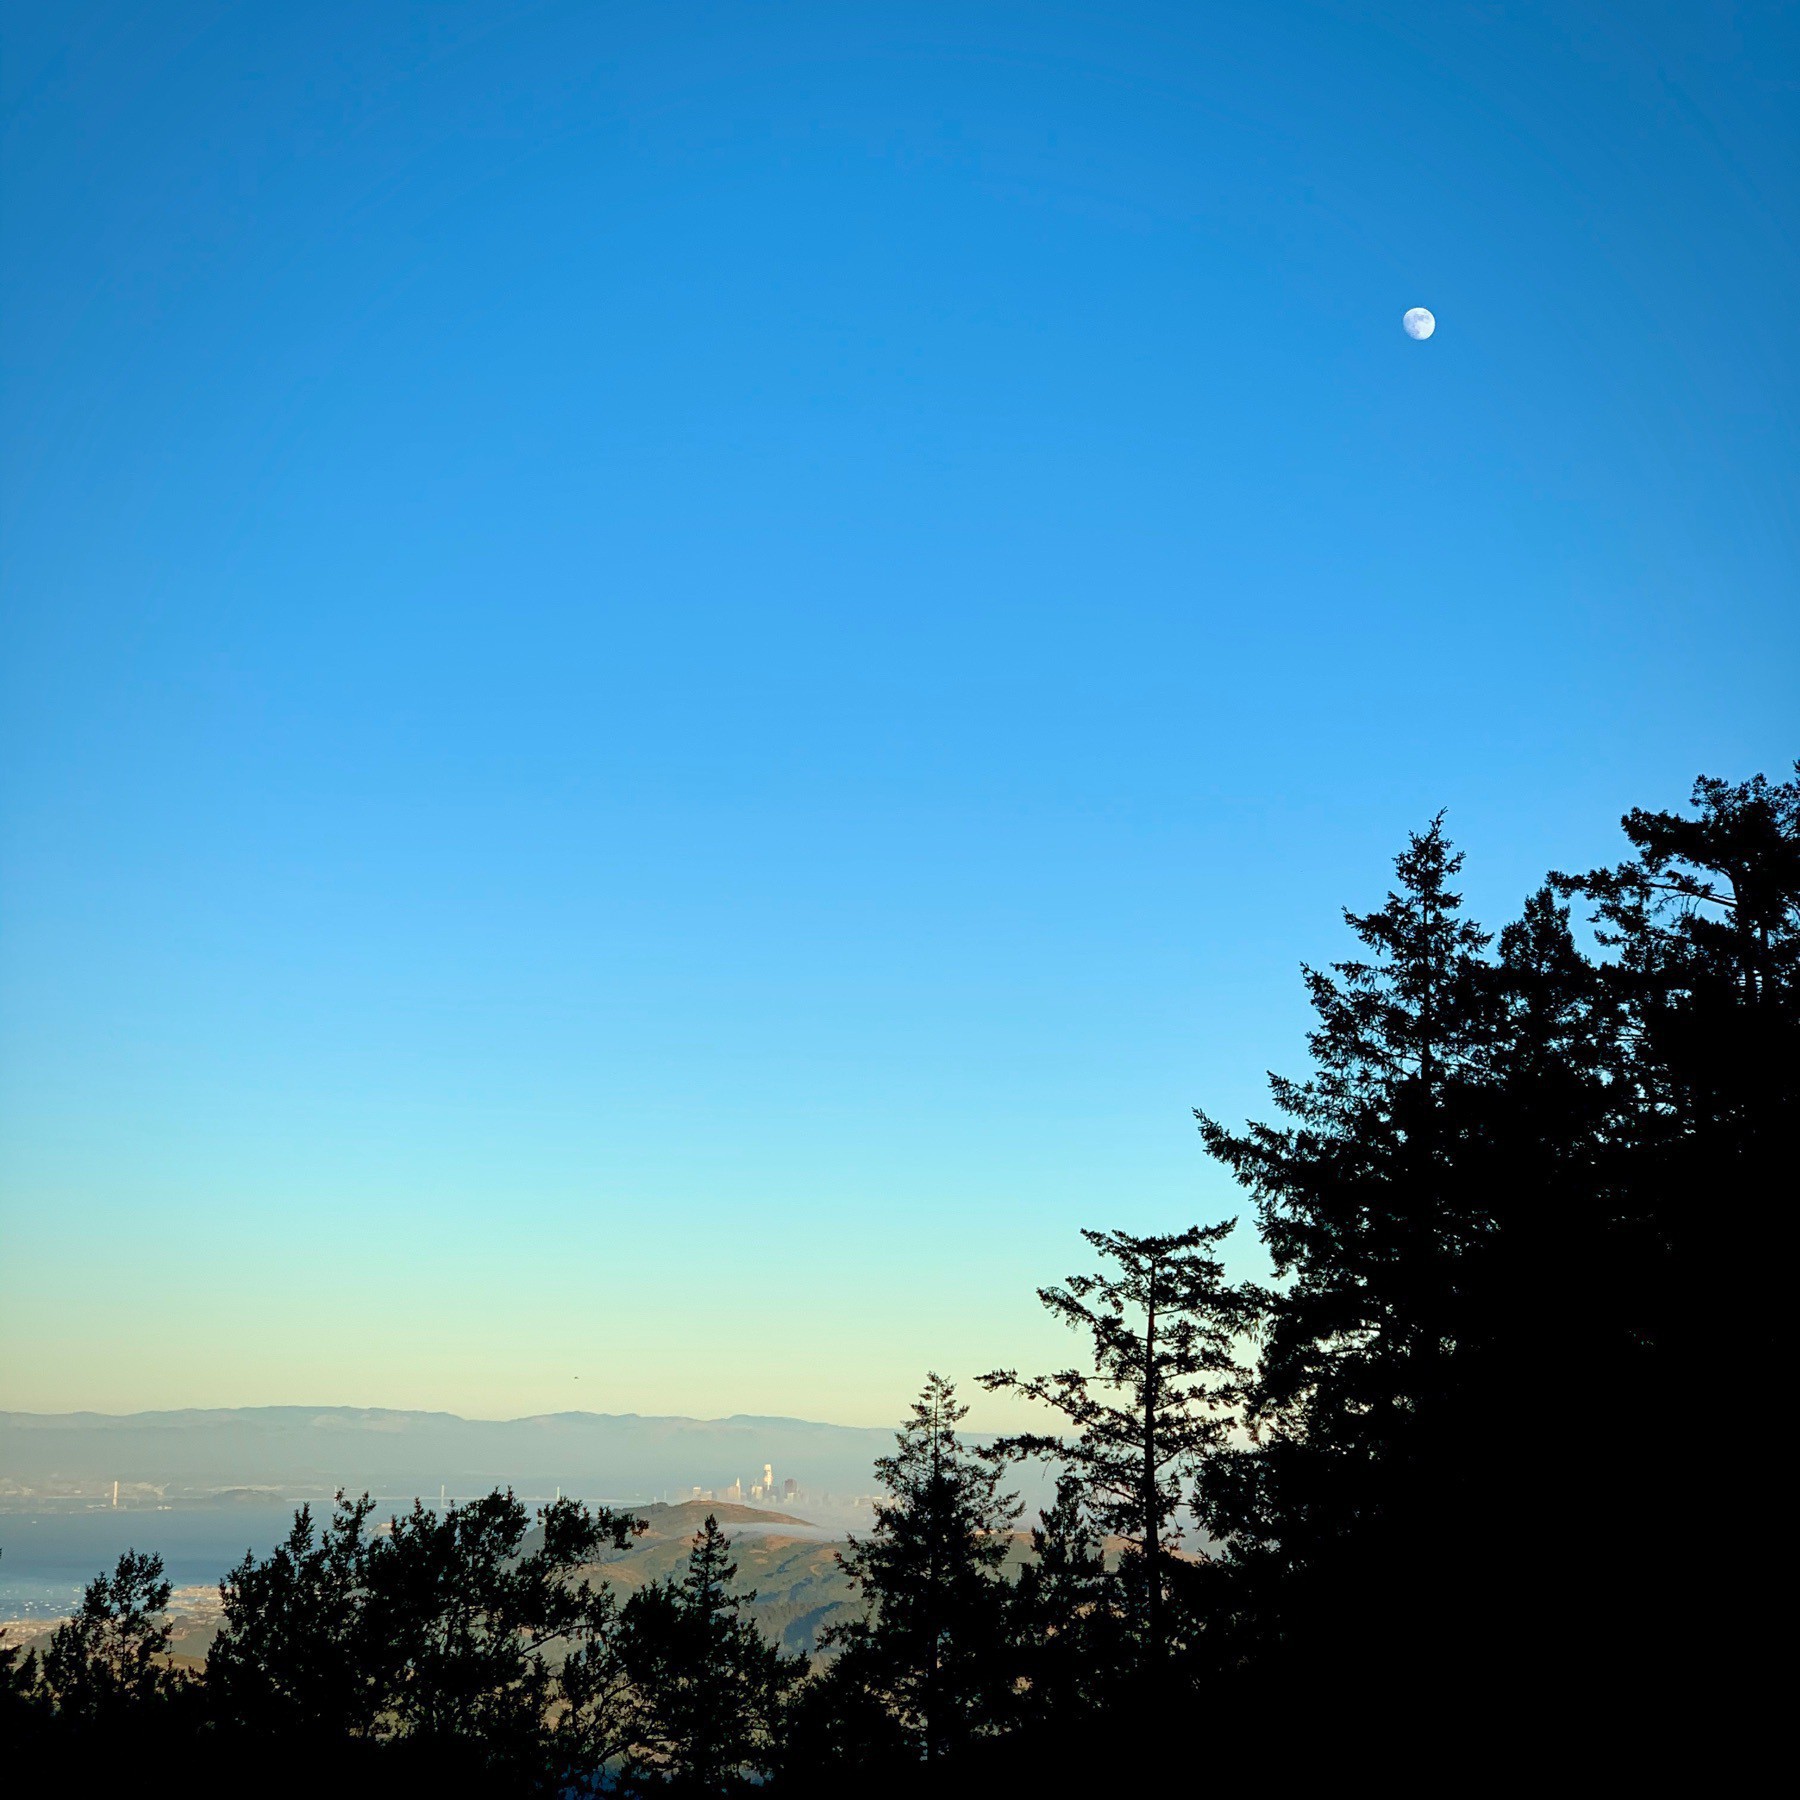 Landscape view of trees and mountain, with nearly full moon at twilight.